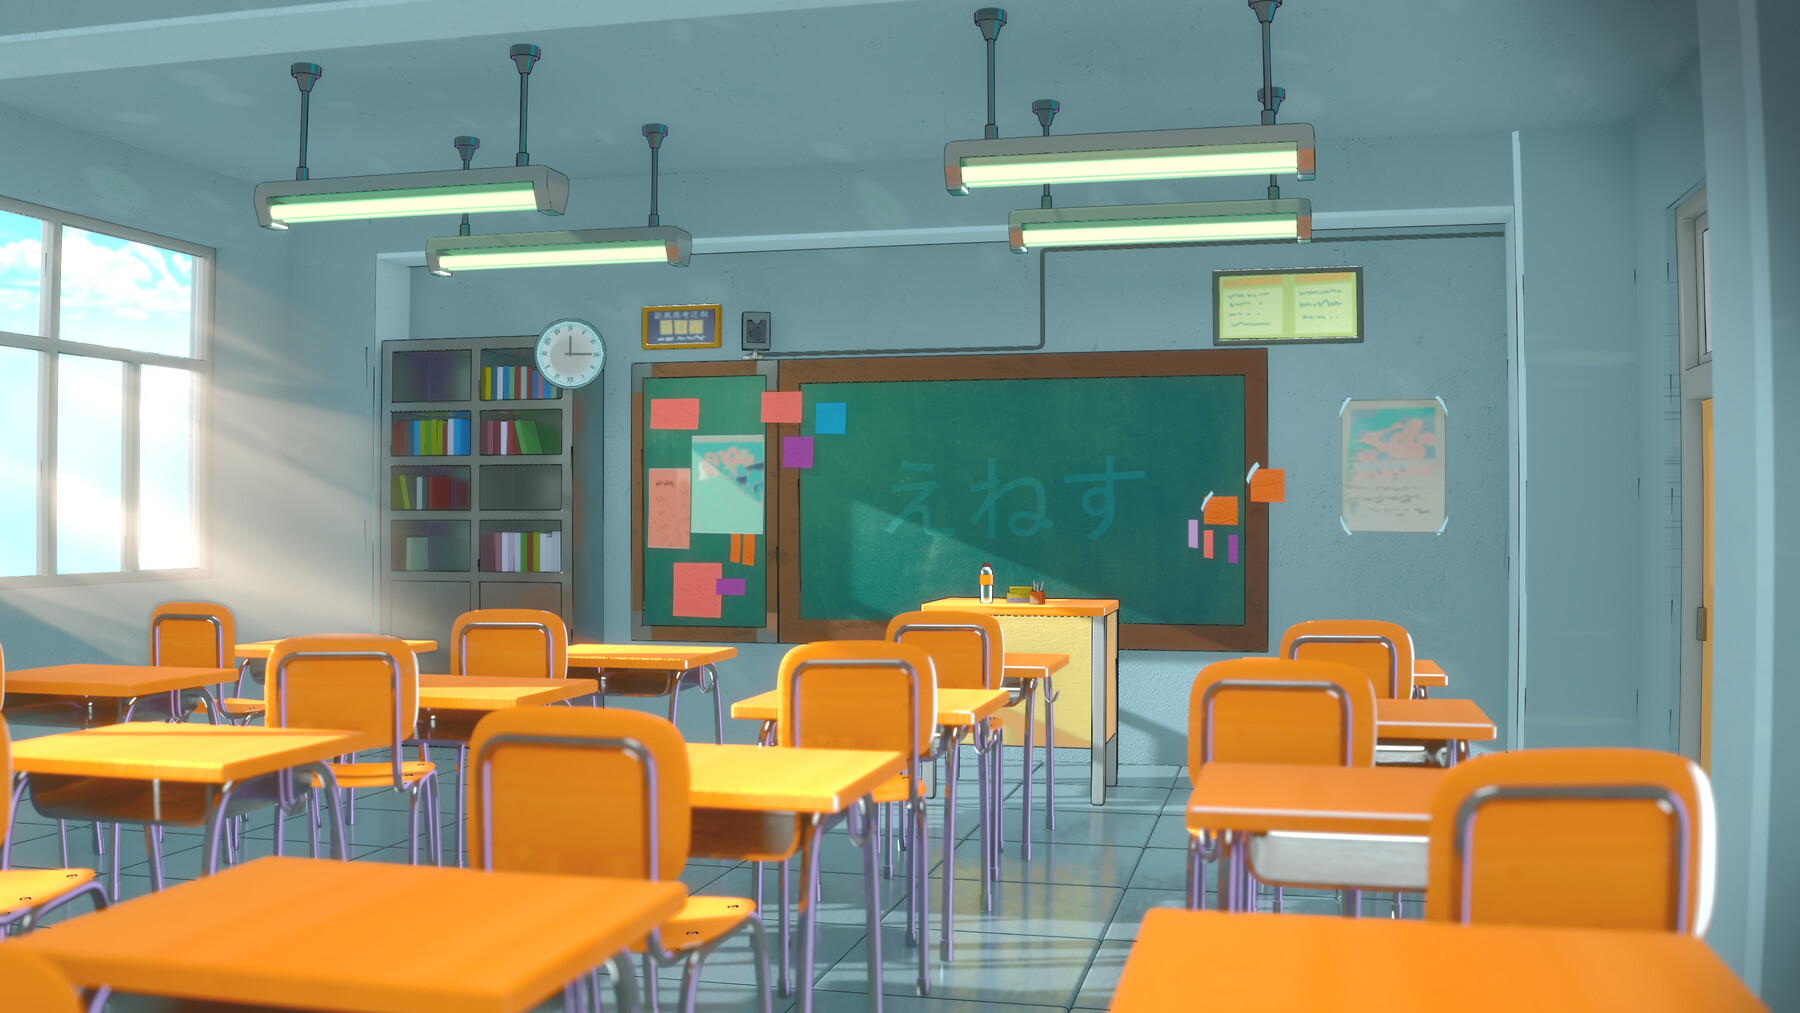 ArtStation - Blender anime style Classroom background / environment |  Resources